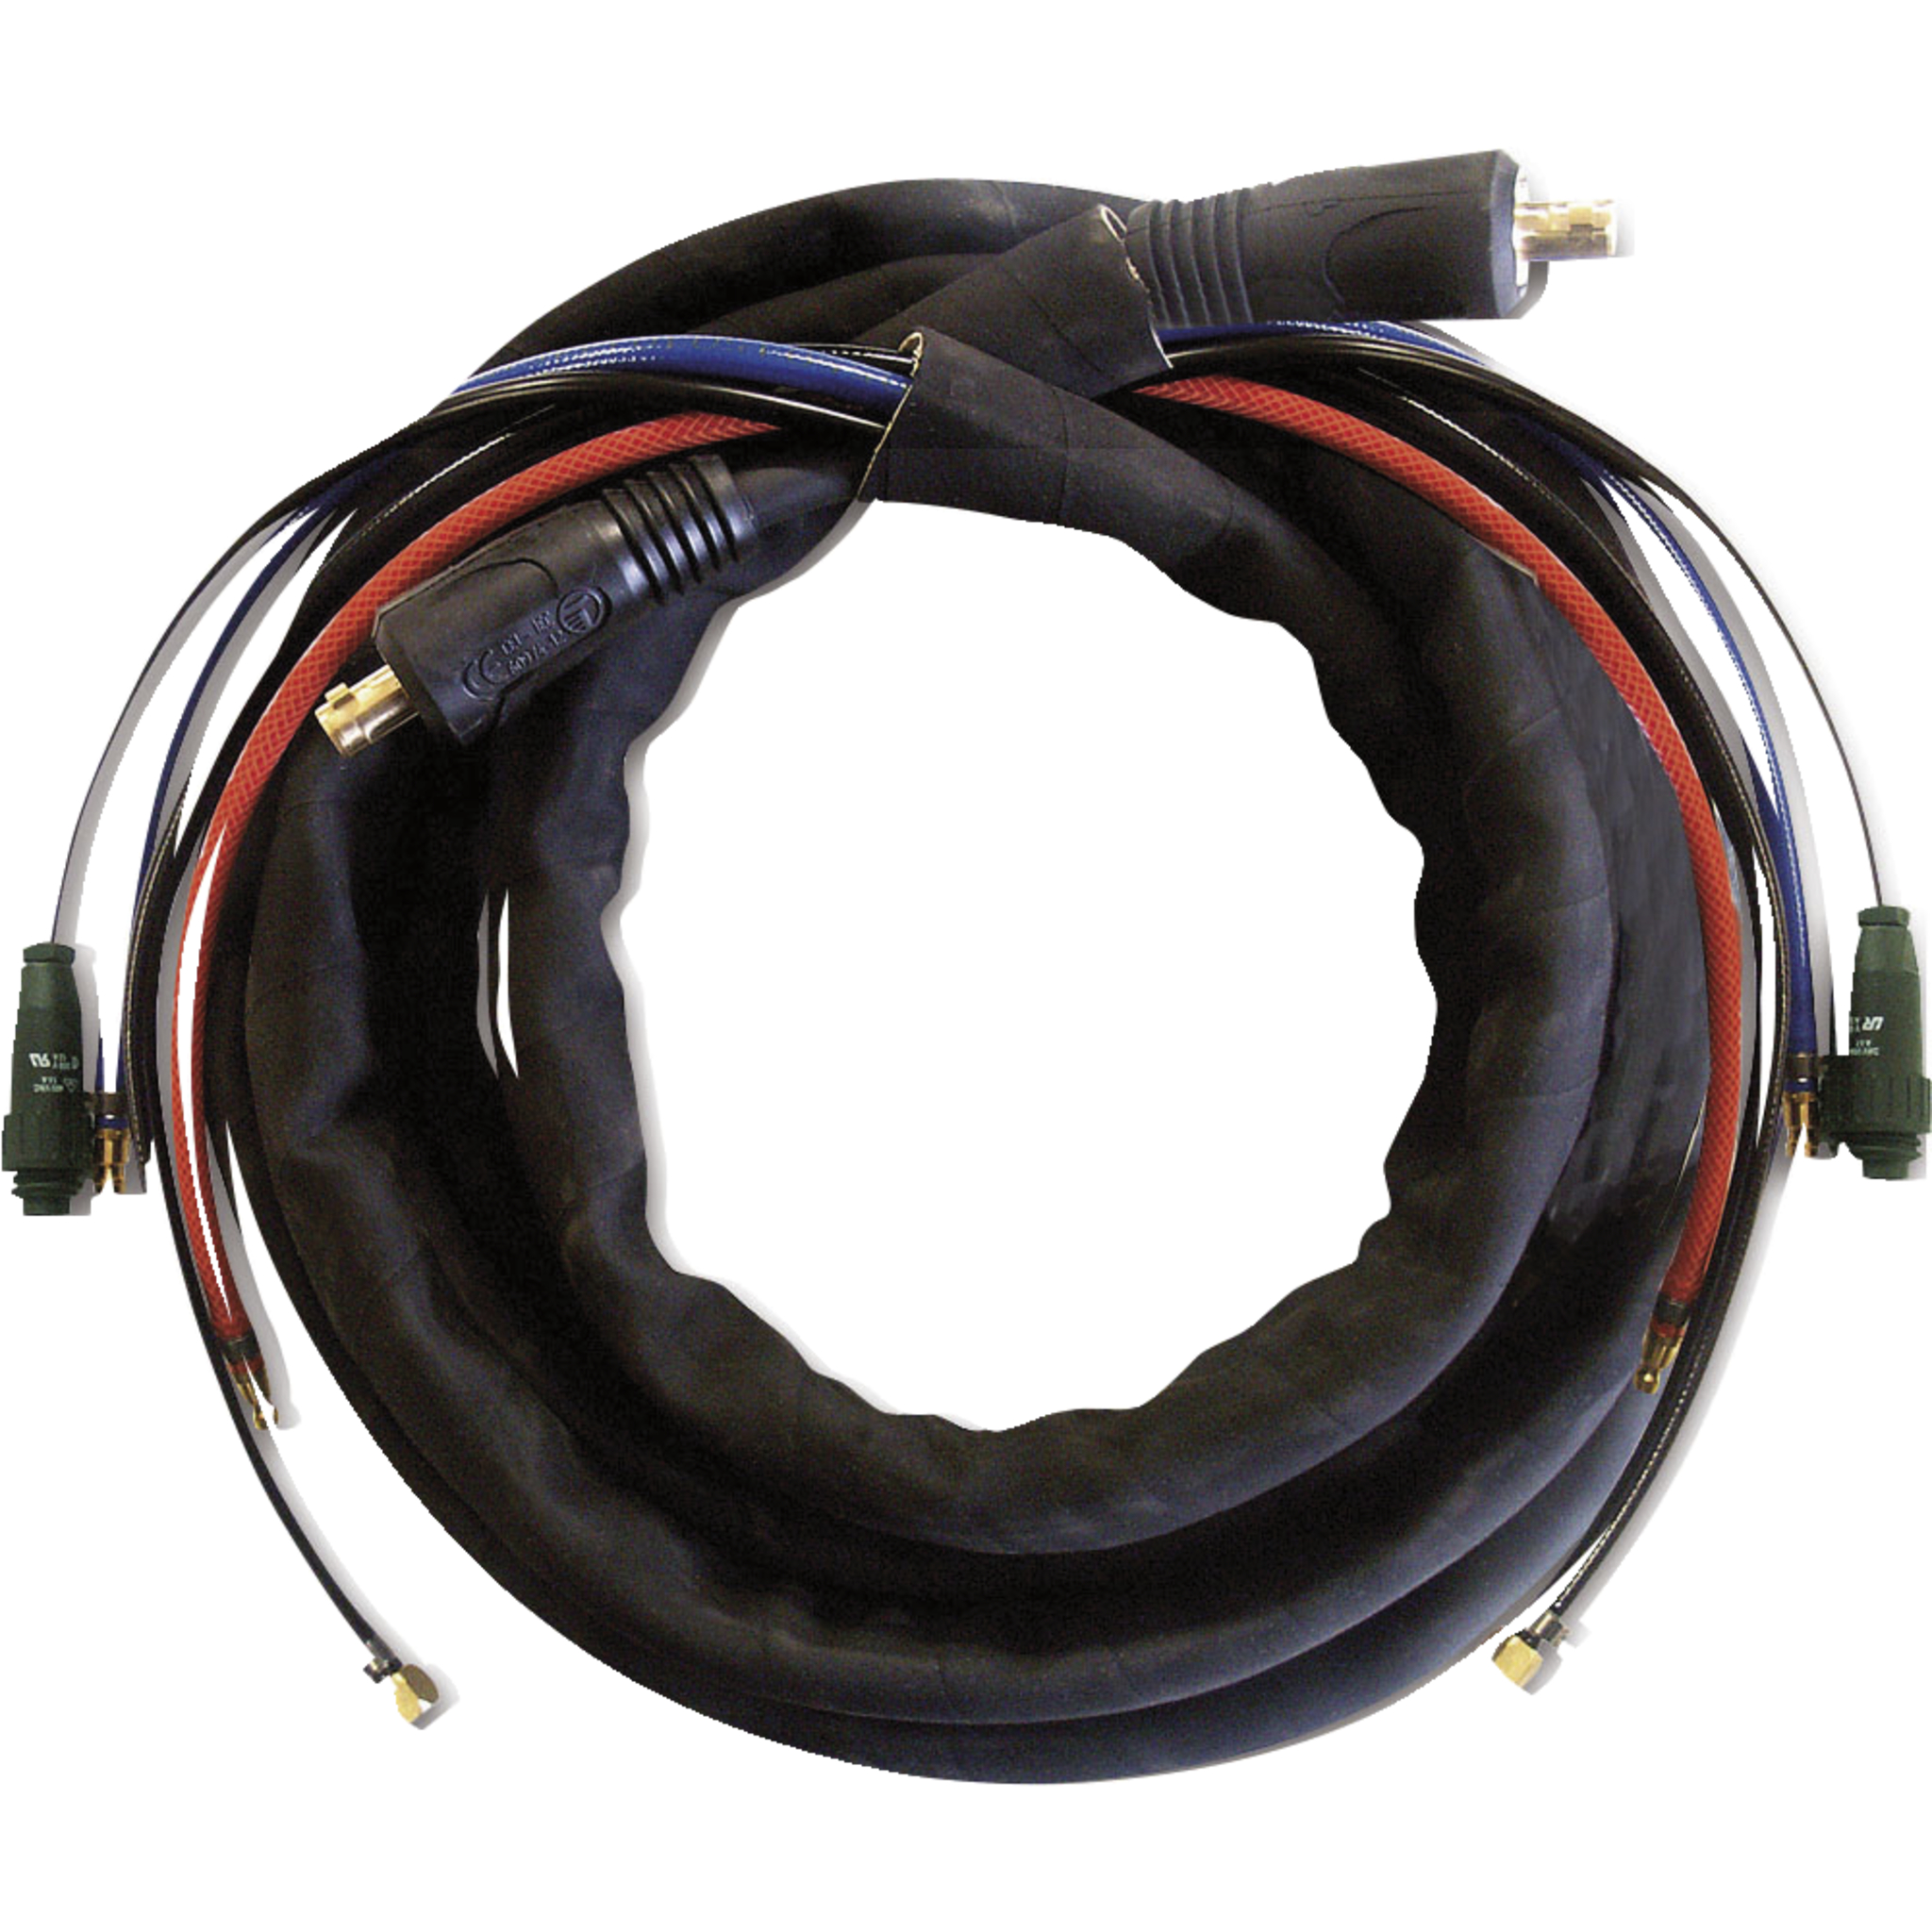 10m 70mm2 Air Cooled Cable